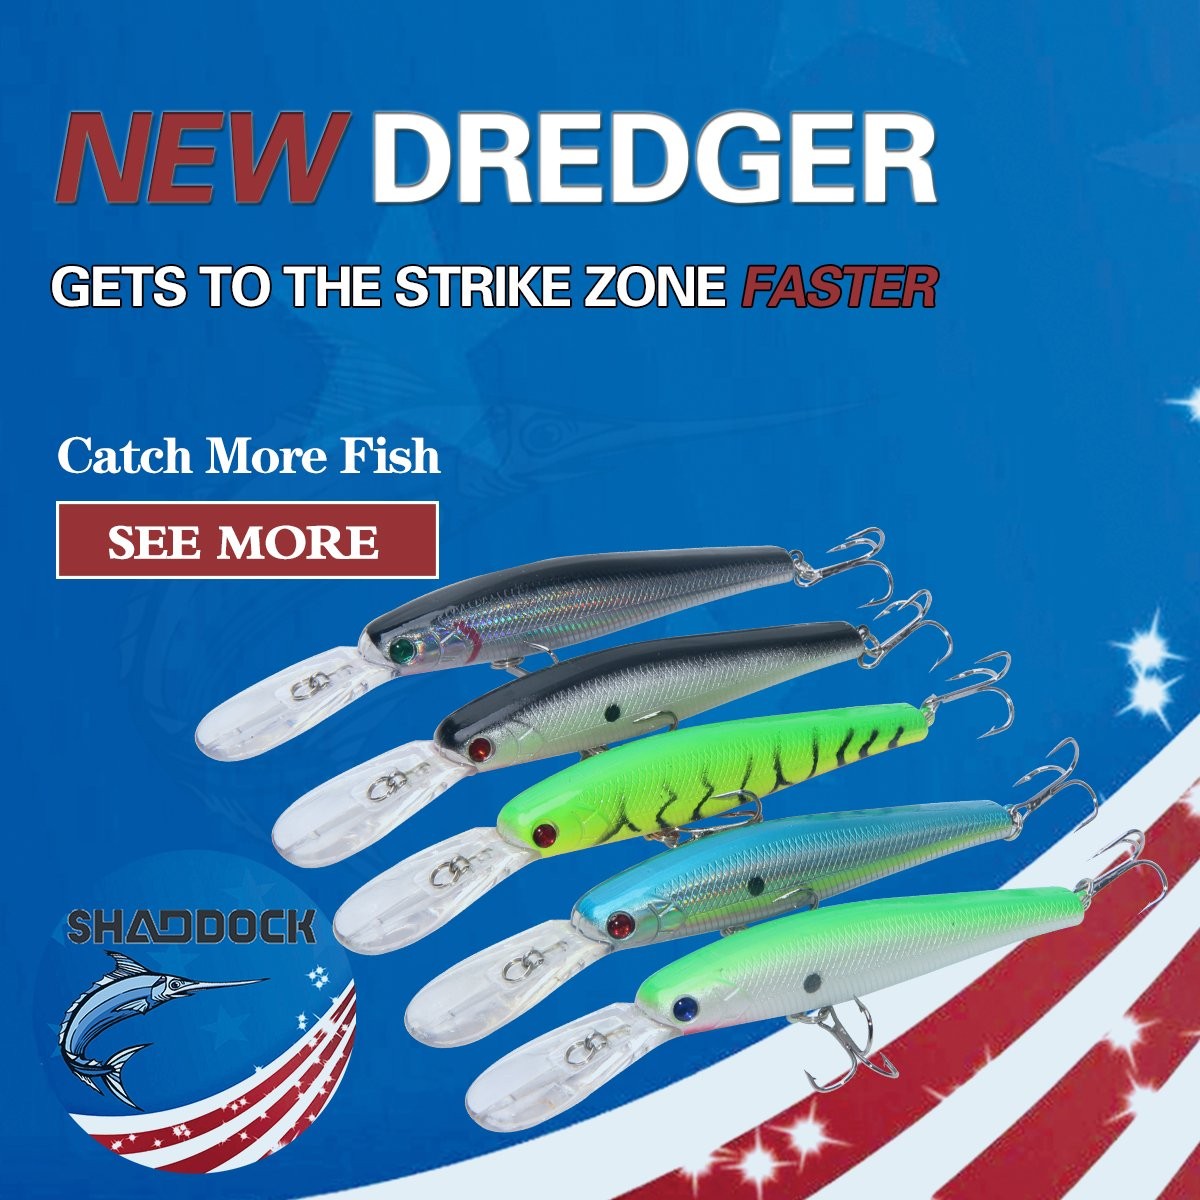 Lures from $2.99. For all angles catching more fis...